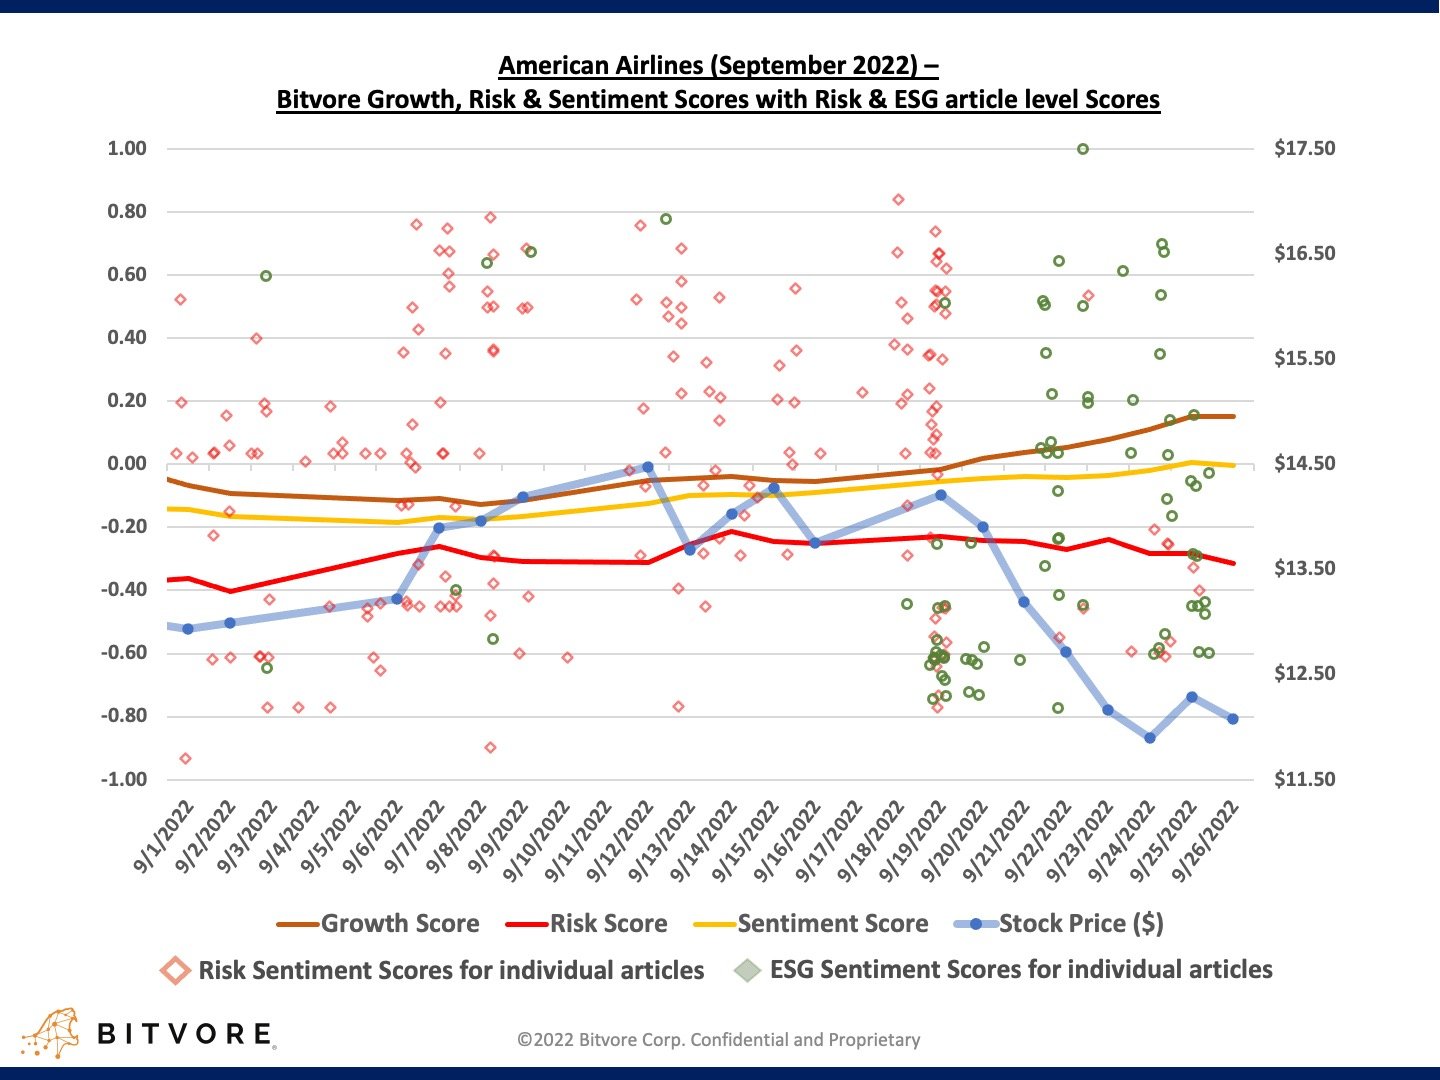 American Airline growth risk and sentiment scores with article level esg scores and stock price Sept 2022